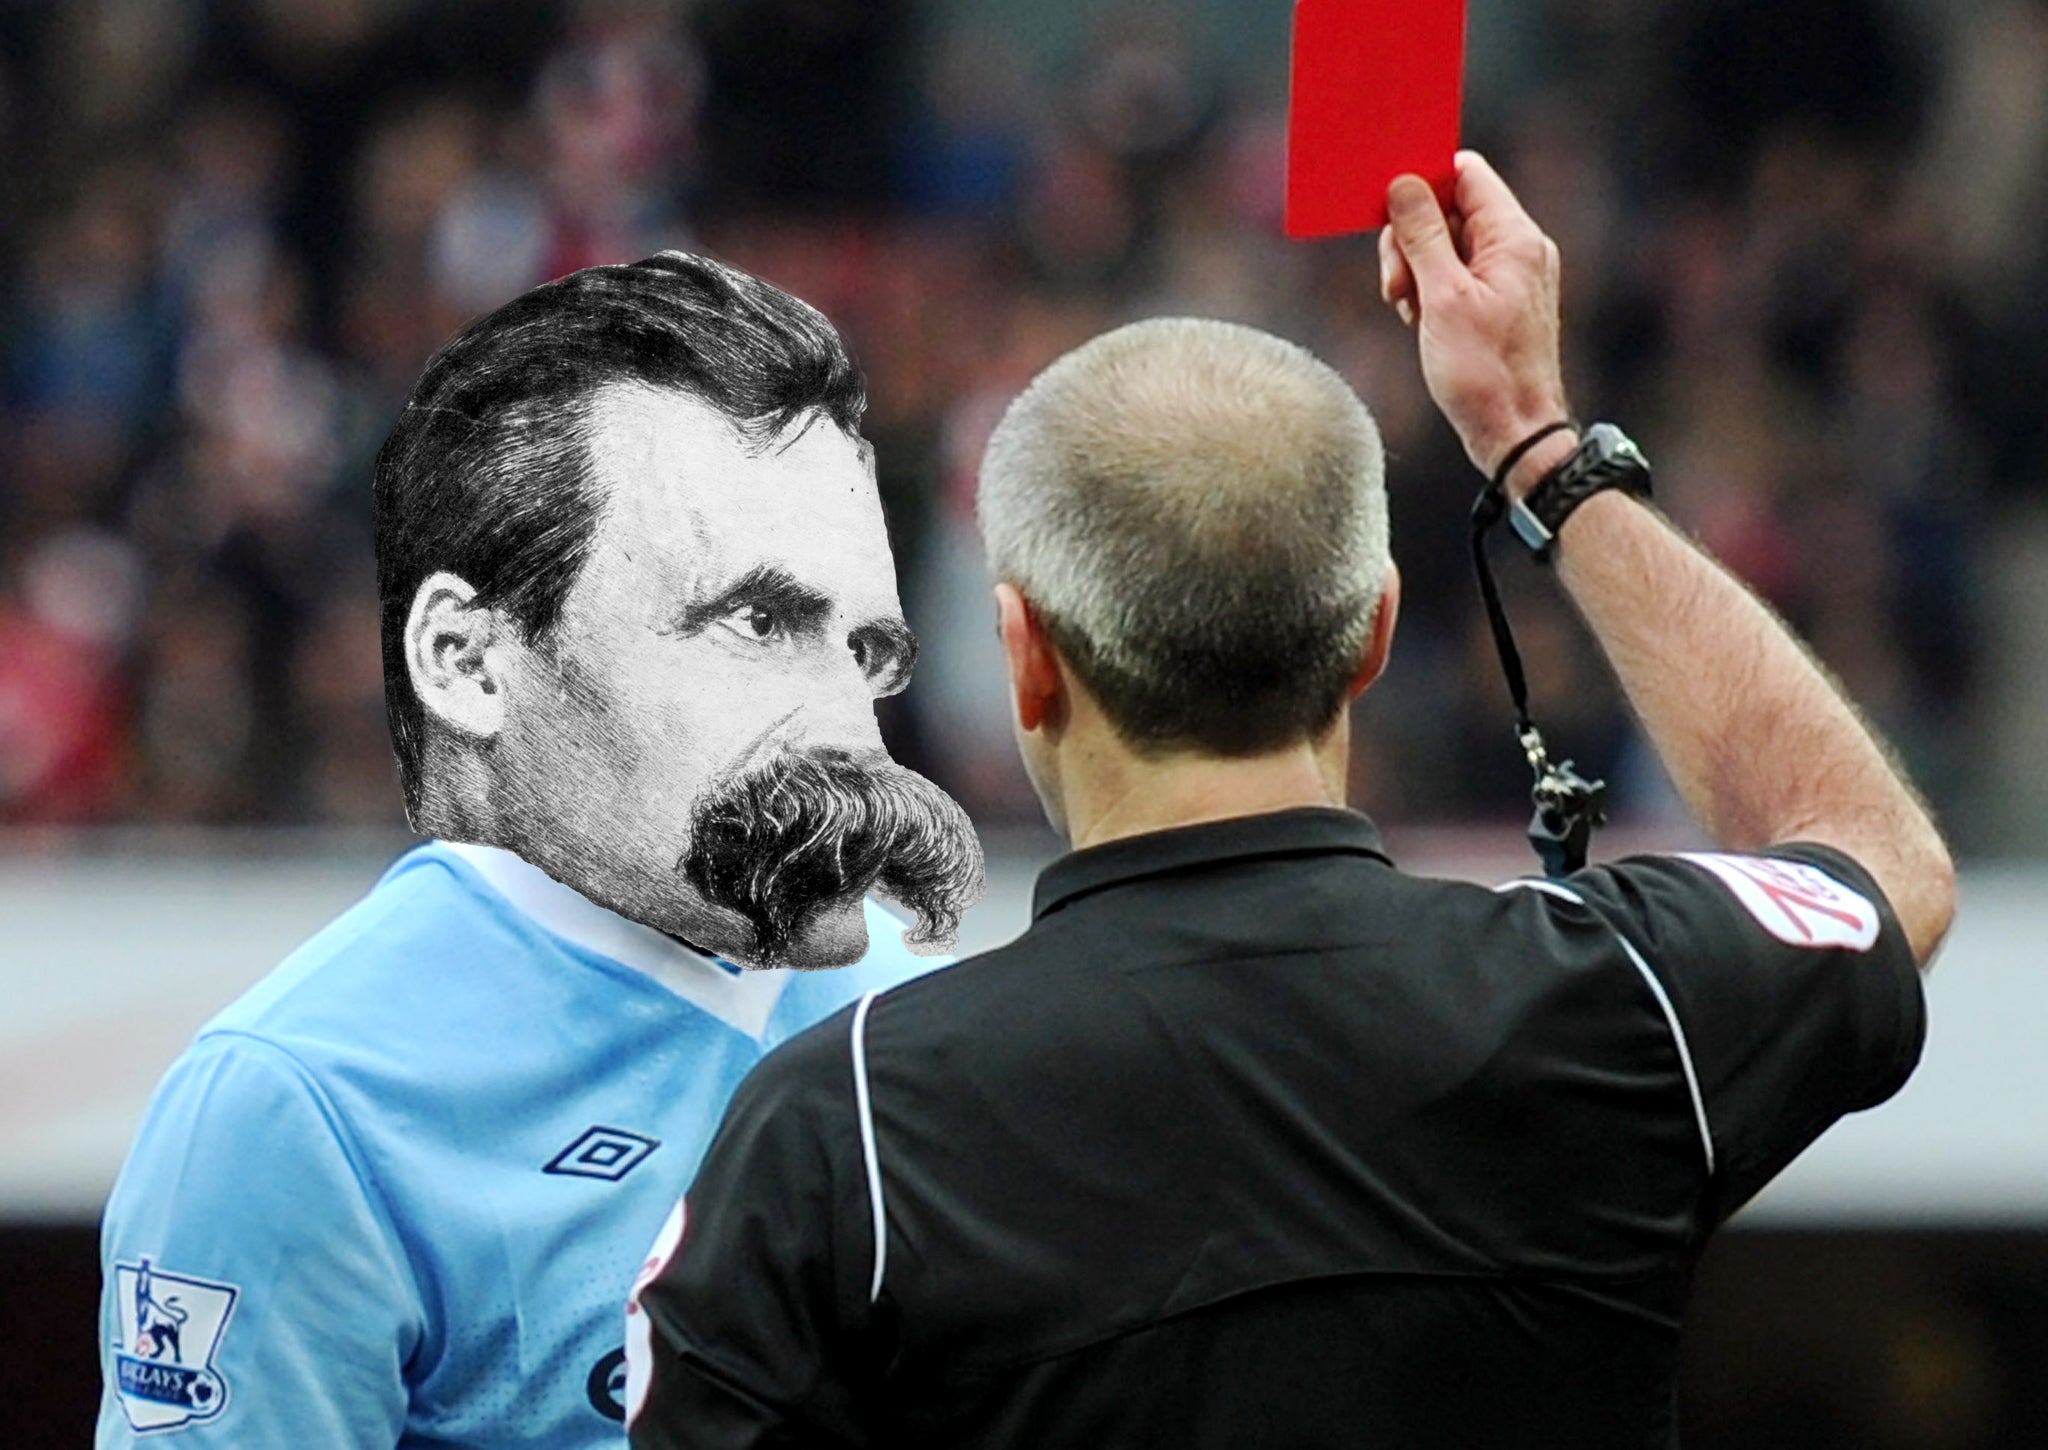 Nietzsche gets sent off the field by a football referee